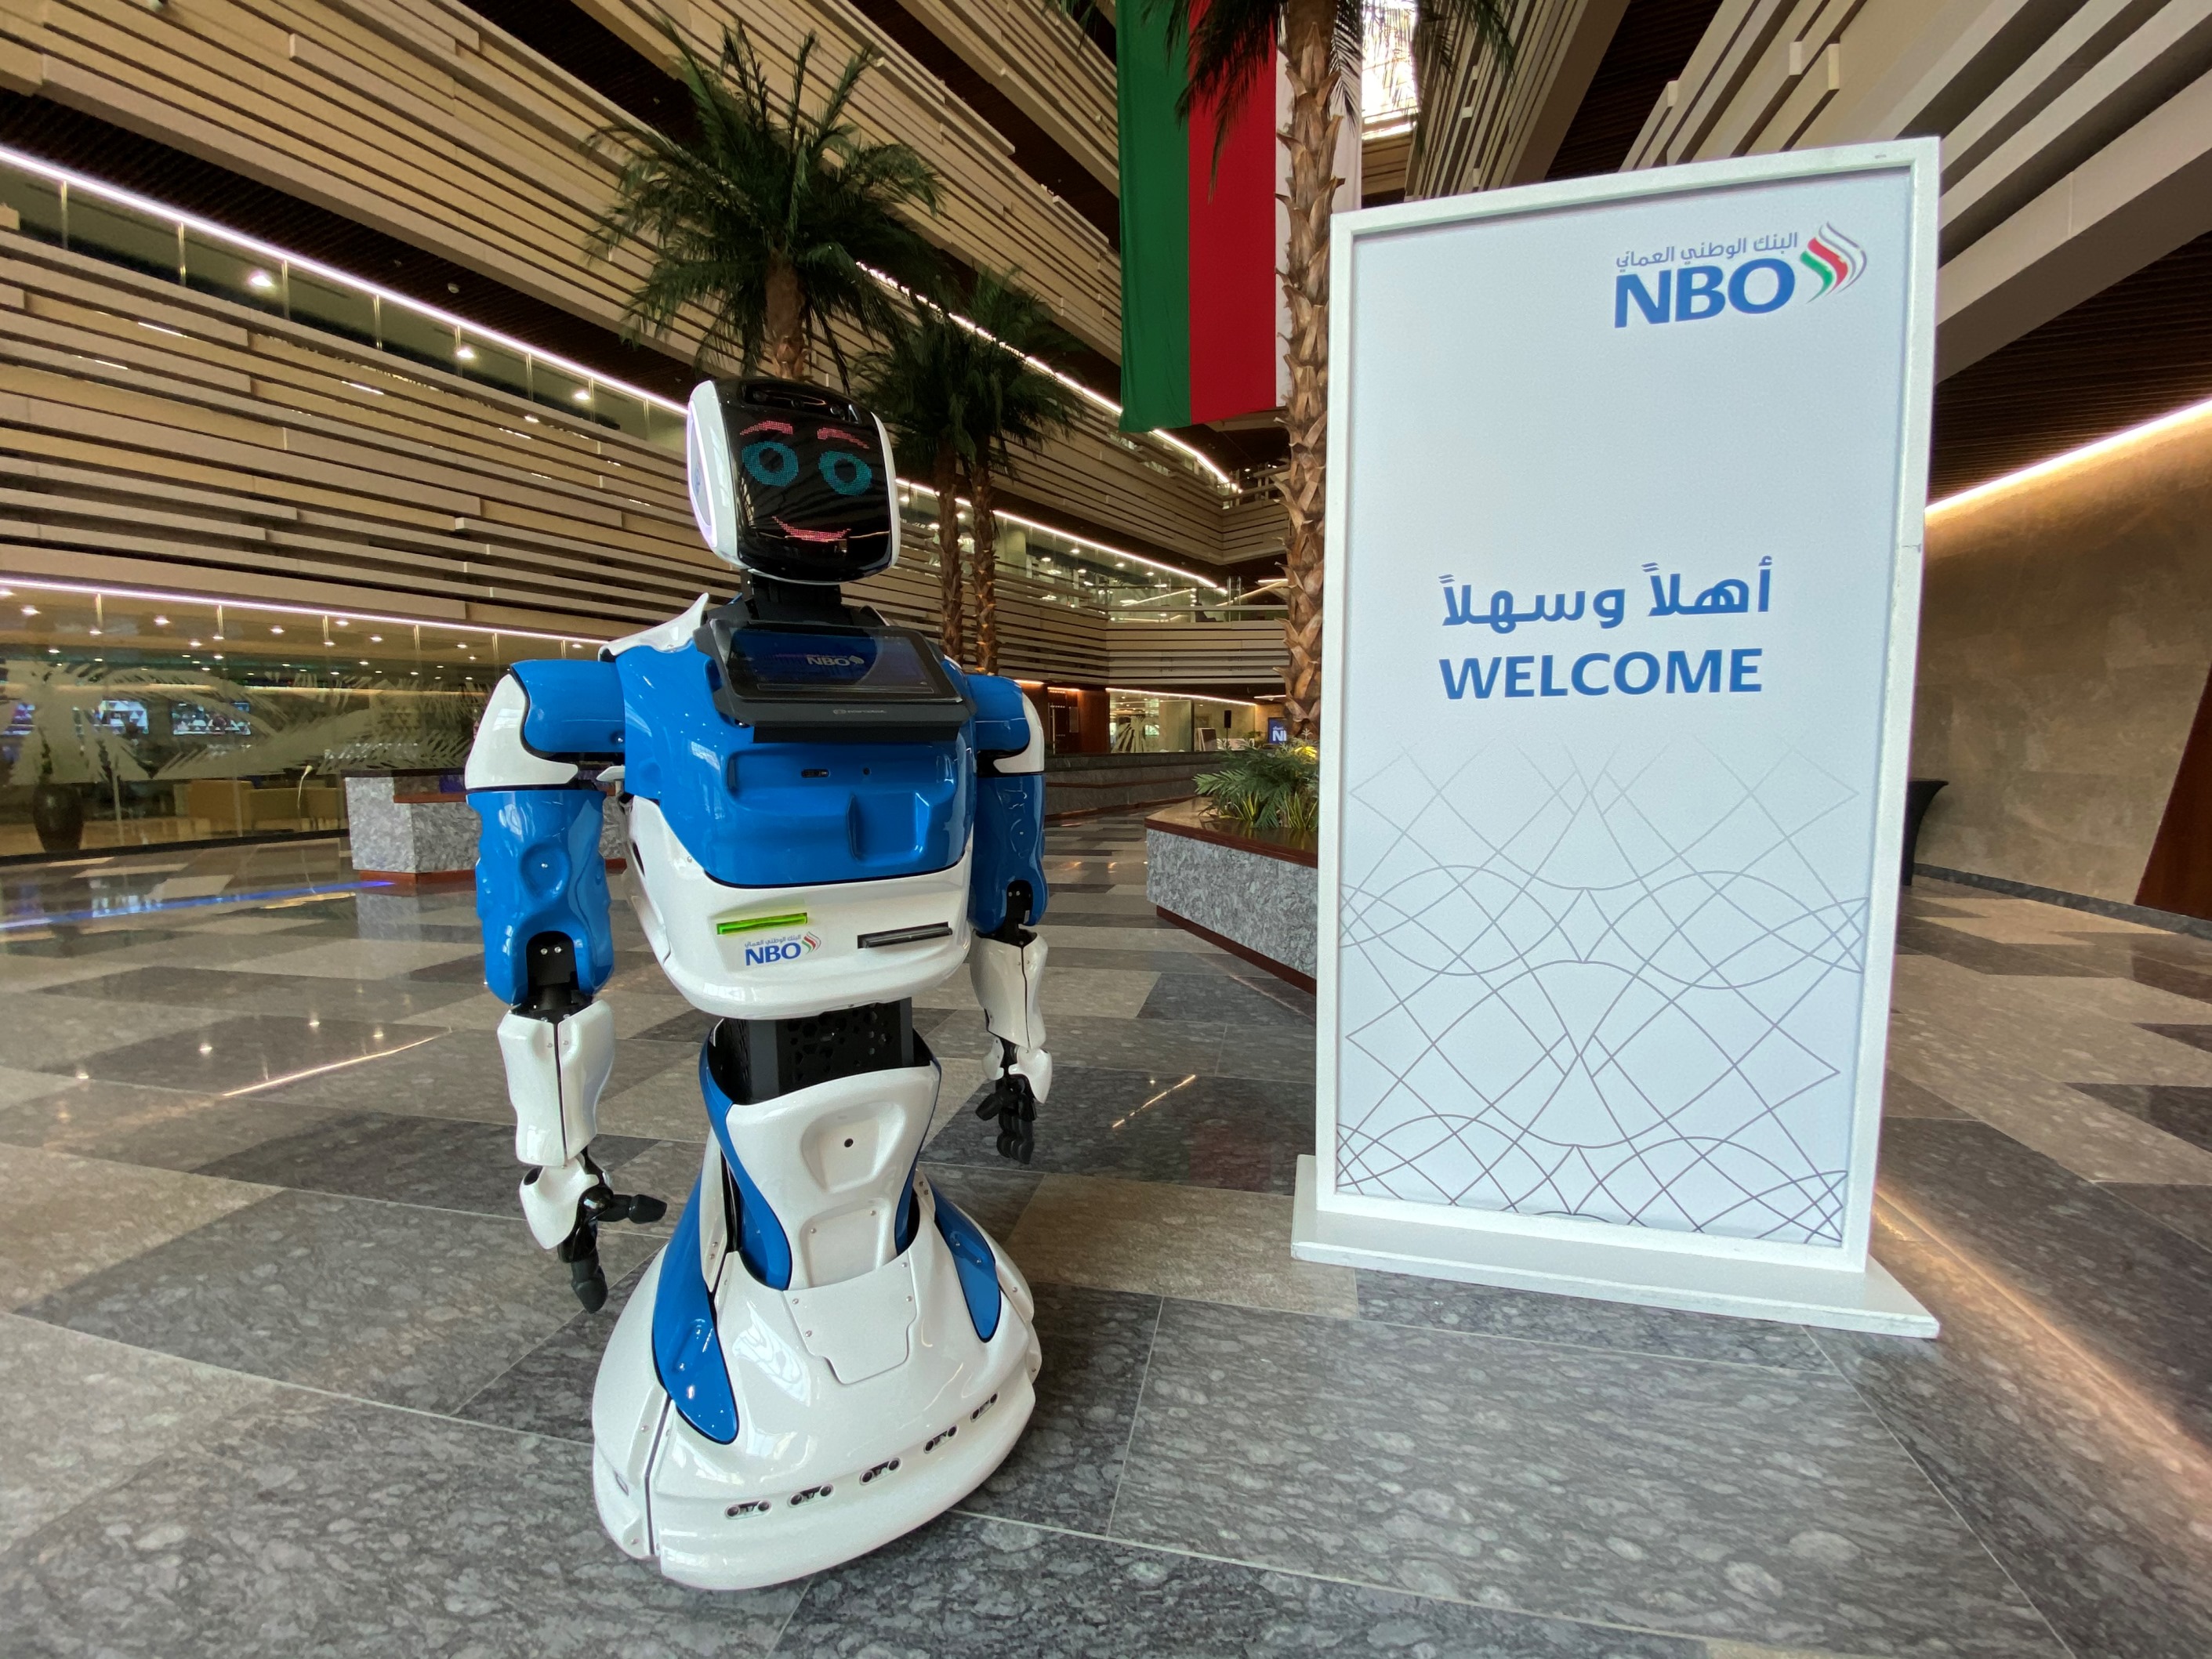 The future is now as National Bank of Oman introduces first of its kind robot